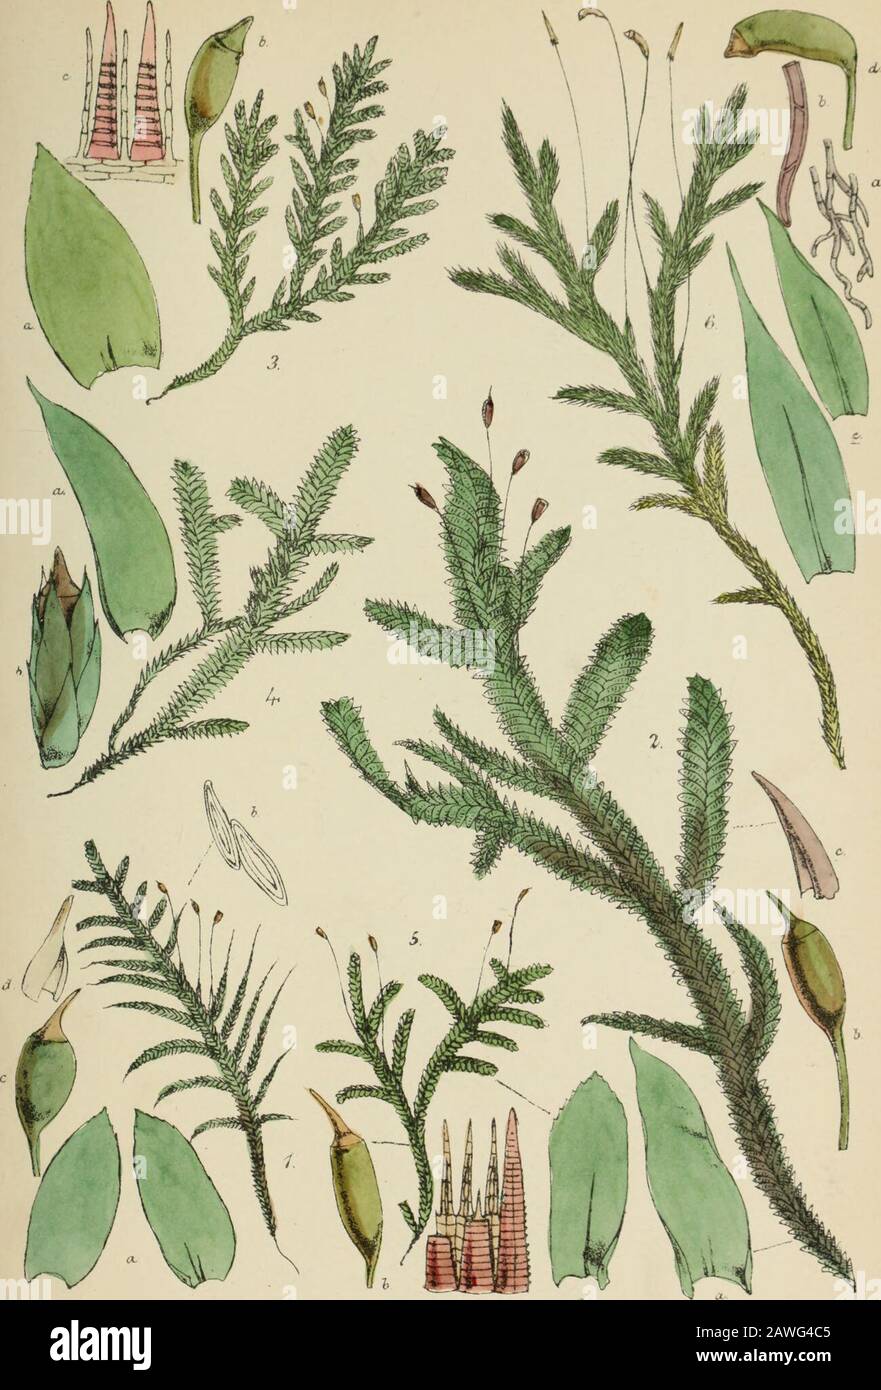 Handbook of British mosses : comprising all that are known to be natives of the British Isles . .^ci OjeL.et .lUT- &gt;ir&gt;i;ert Crodtz imi  PLATE IV. 1. Neckera complanata. n. leaves, magnified. b. leaf-cells, magnified. c. sporangium, magnified. d. veil, magnified. 2. N. crispa. a» leaf, magnified. b, sporangium, magnified. c, veil, magnified. 3. N. pumila. a. leaf magnified. b. sporangium magnified. c. part of peristome, magnified, seen from within. 4. N. pennata. a. leaf, magnified. b. sporangium, magnified, with perichsetium. 5. Homalia trichomanoides. a. leaf, magnified. b. sporangi Stock Photo